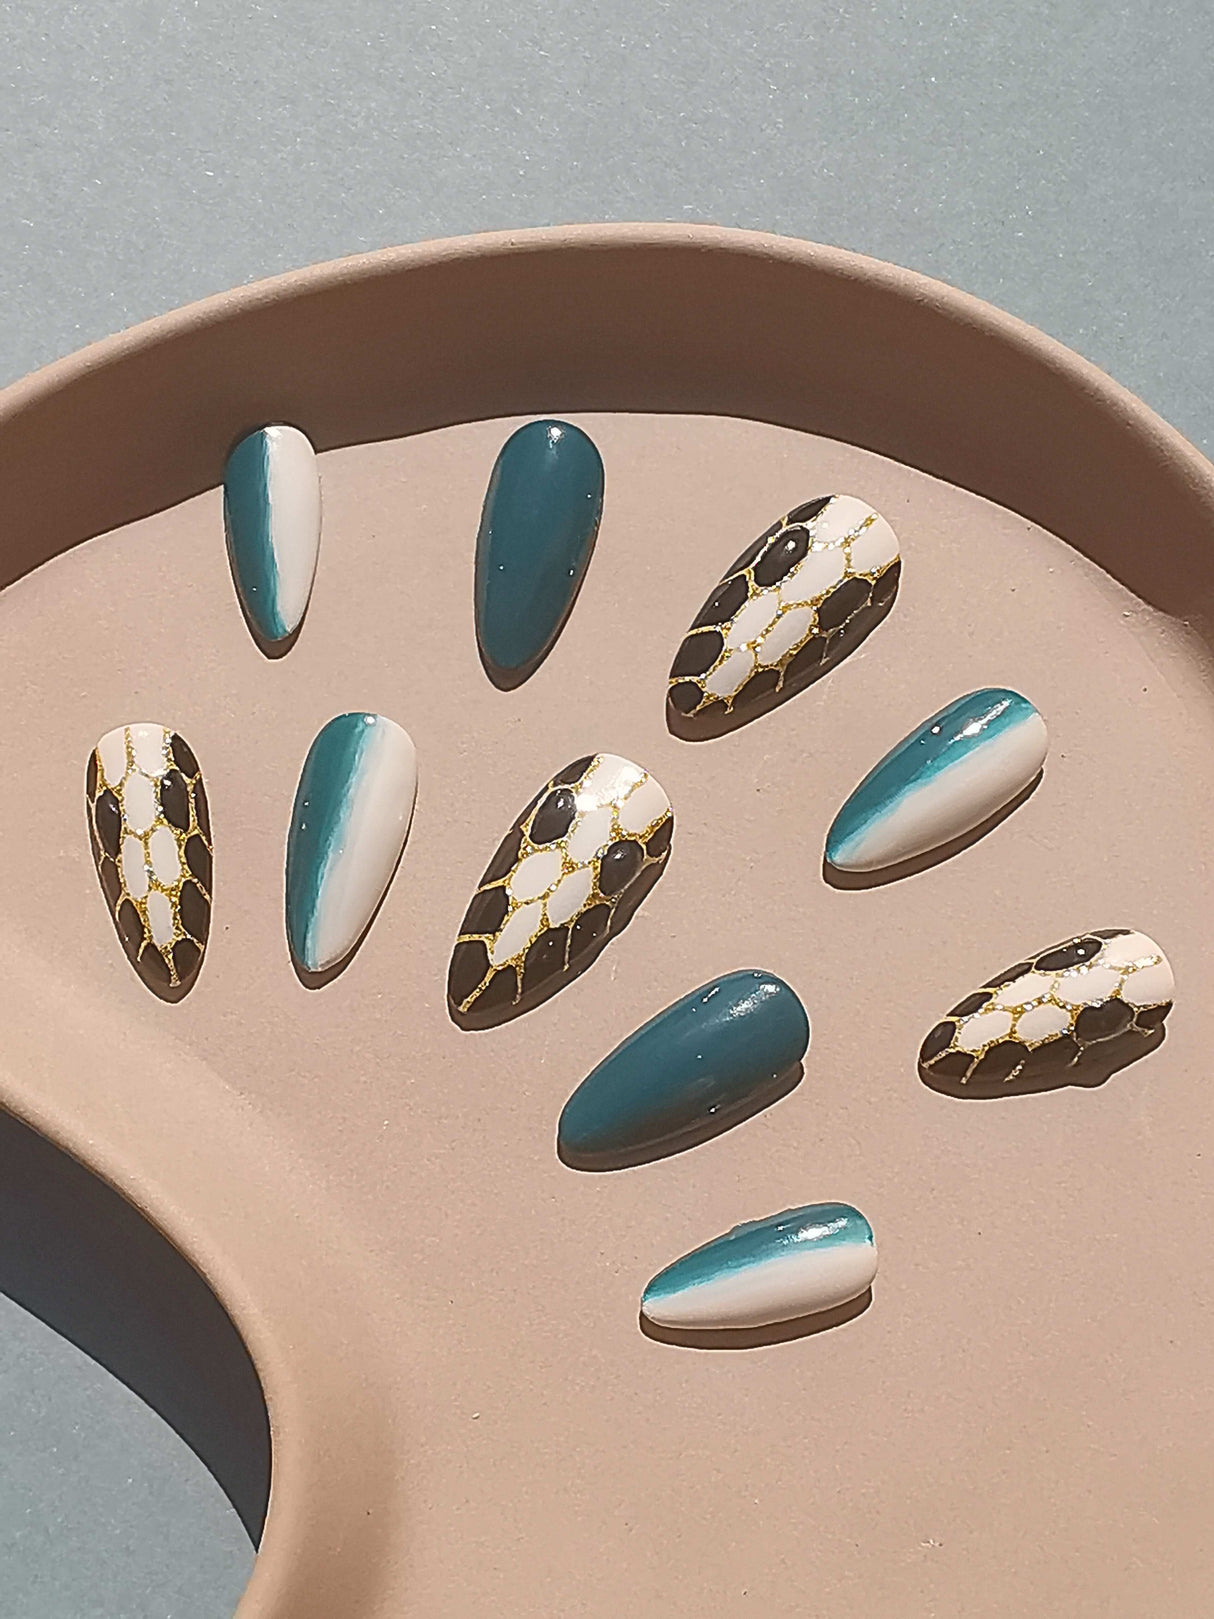 These press-on nails feature solid colors, a glossy finish, an almond shape, and a tortoiseshell pattern.